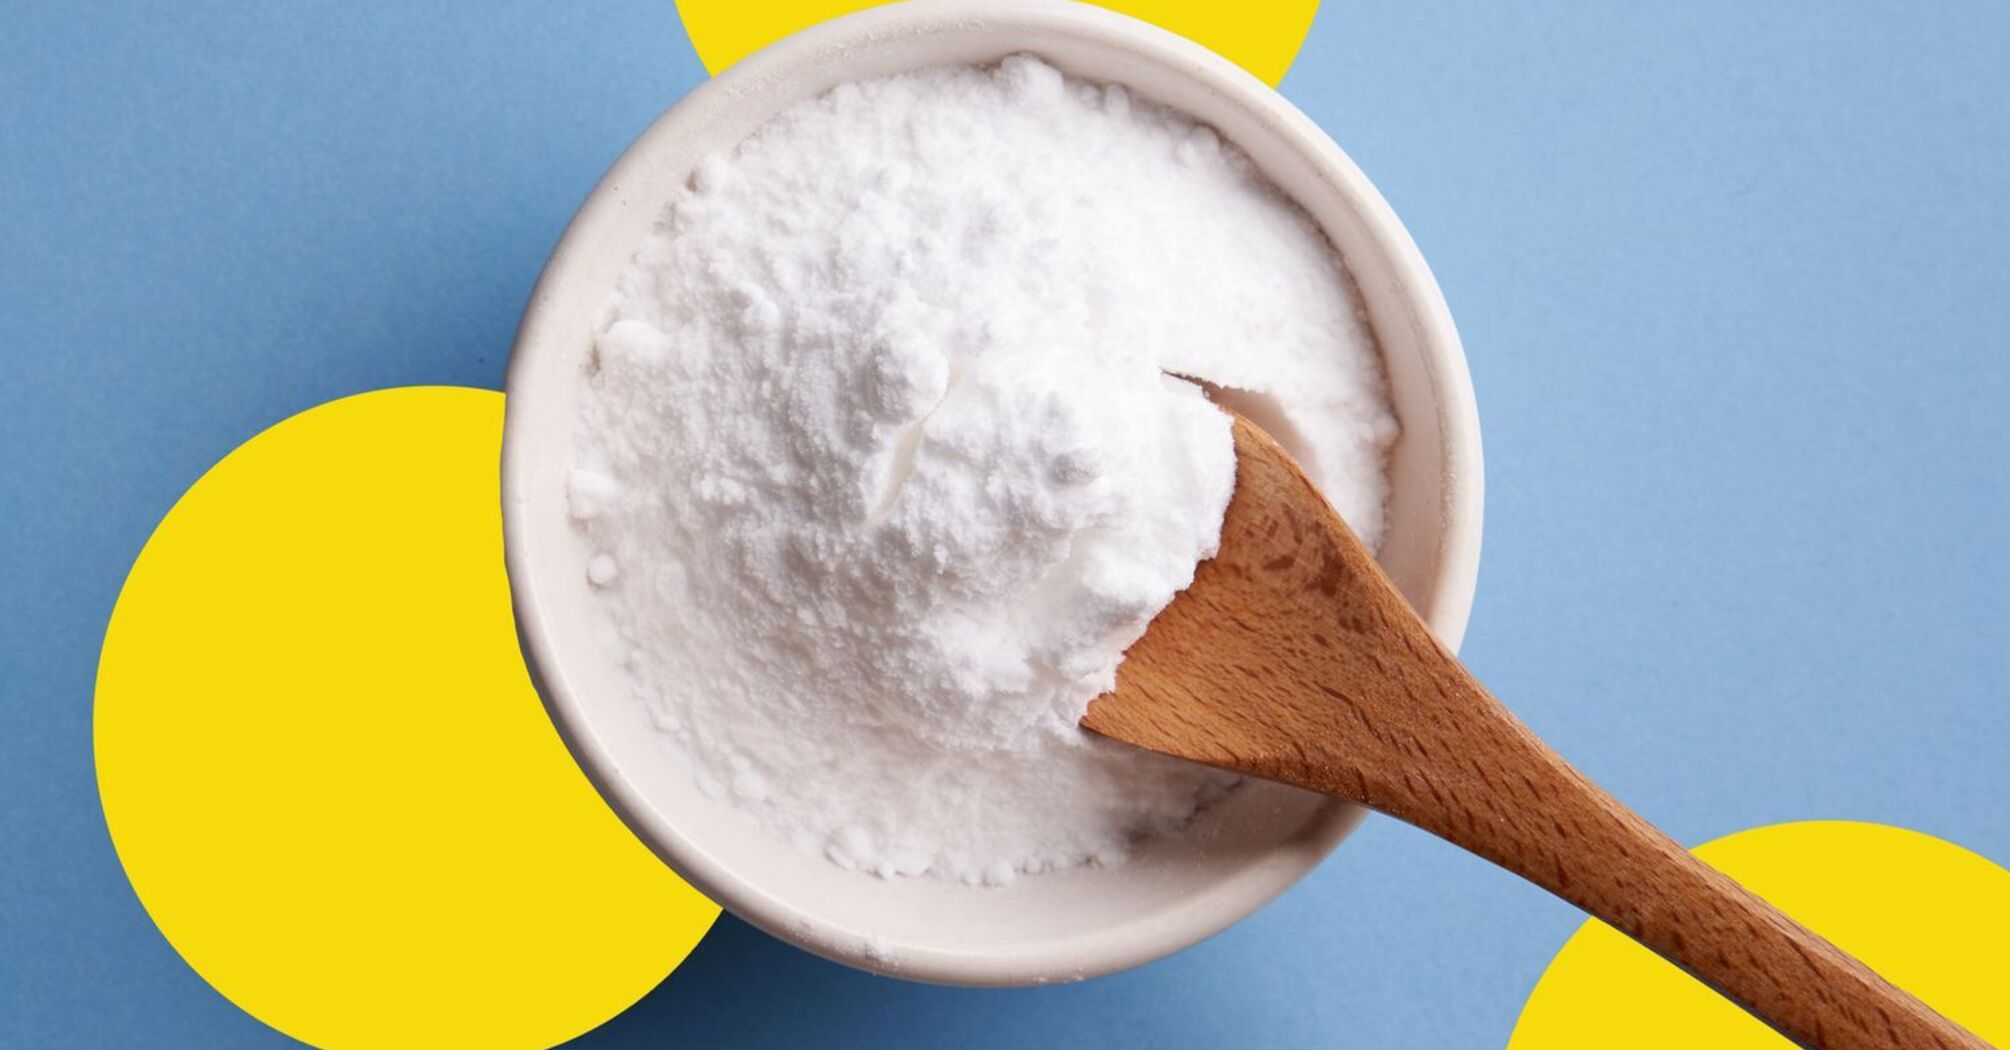 What can replace baking powder